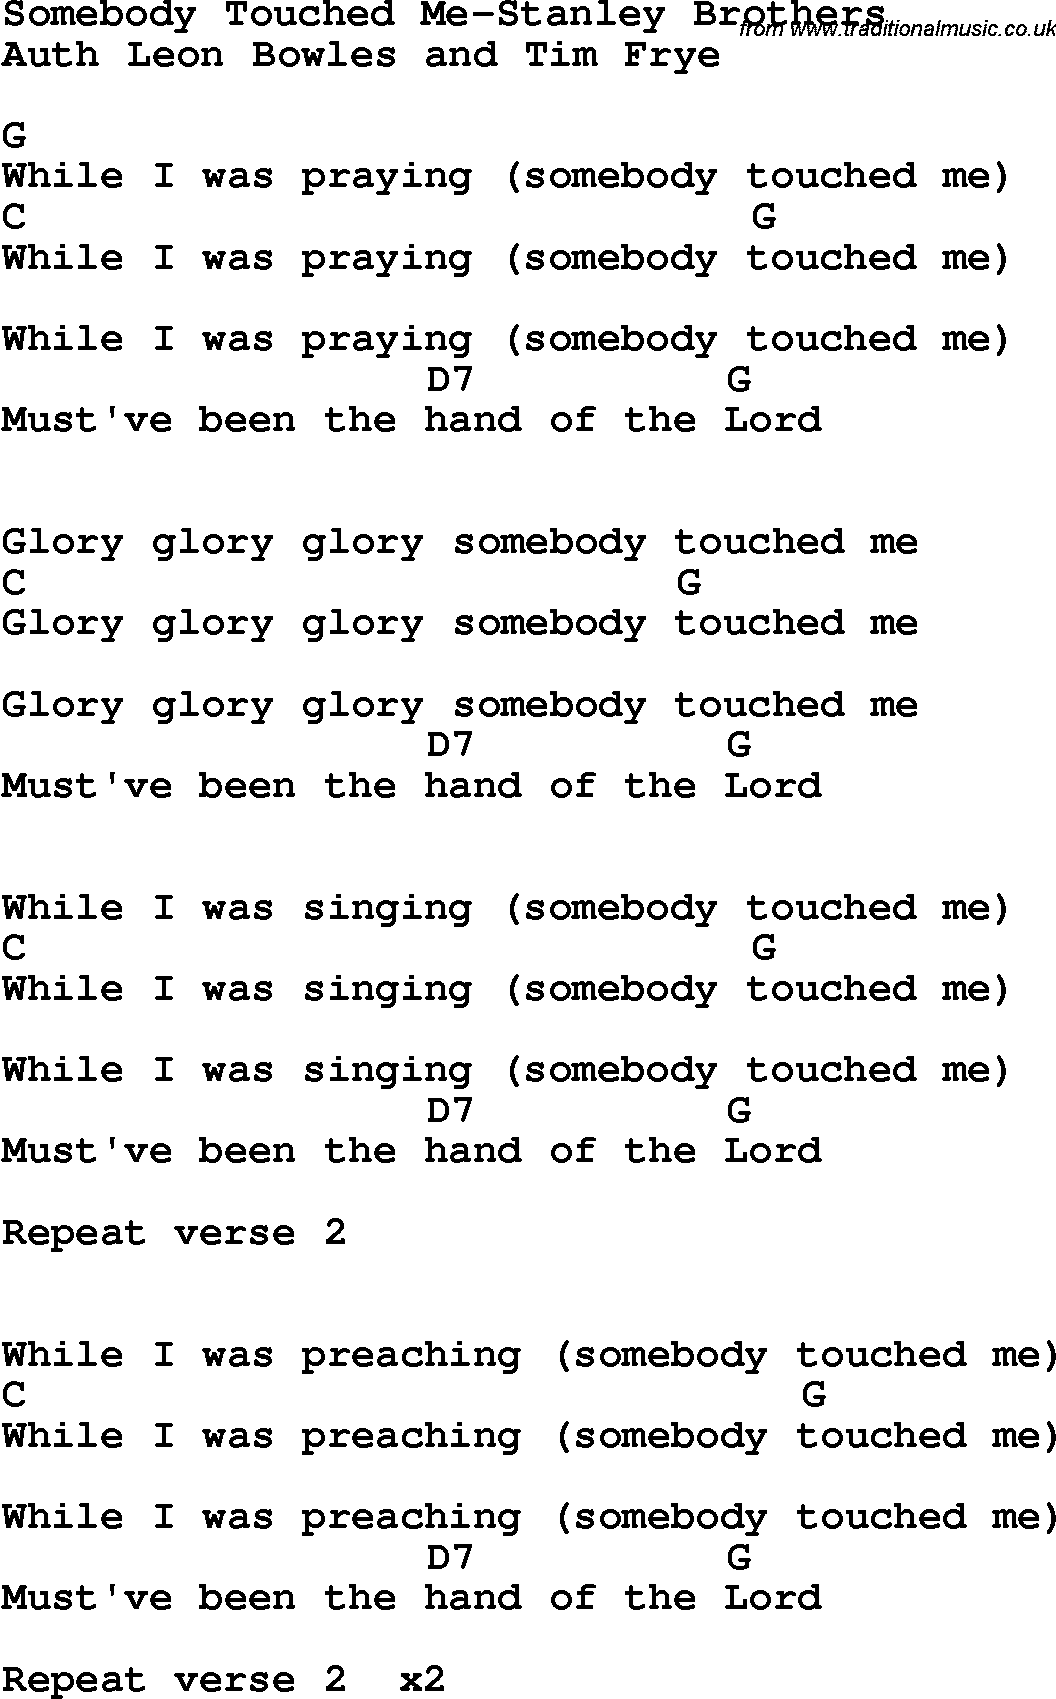 Country, Southern and Bluegrass Gospel Song Somebody Touched Me-Stanley Brothers lyrics and chords